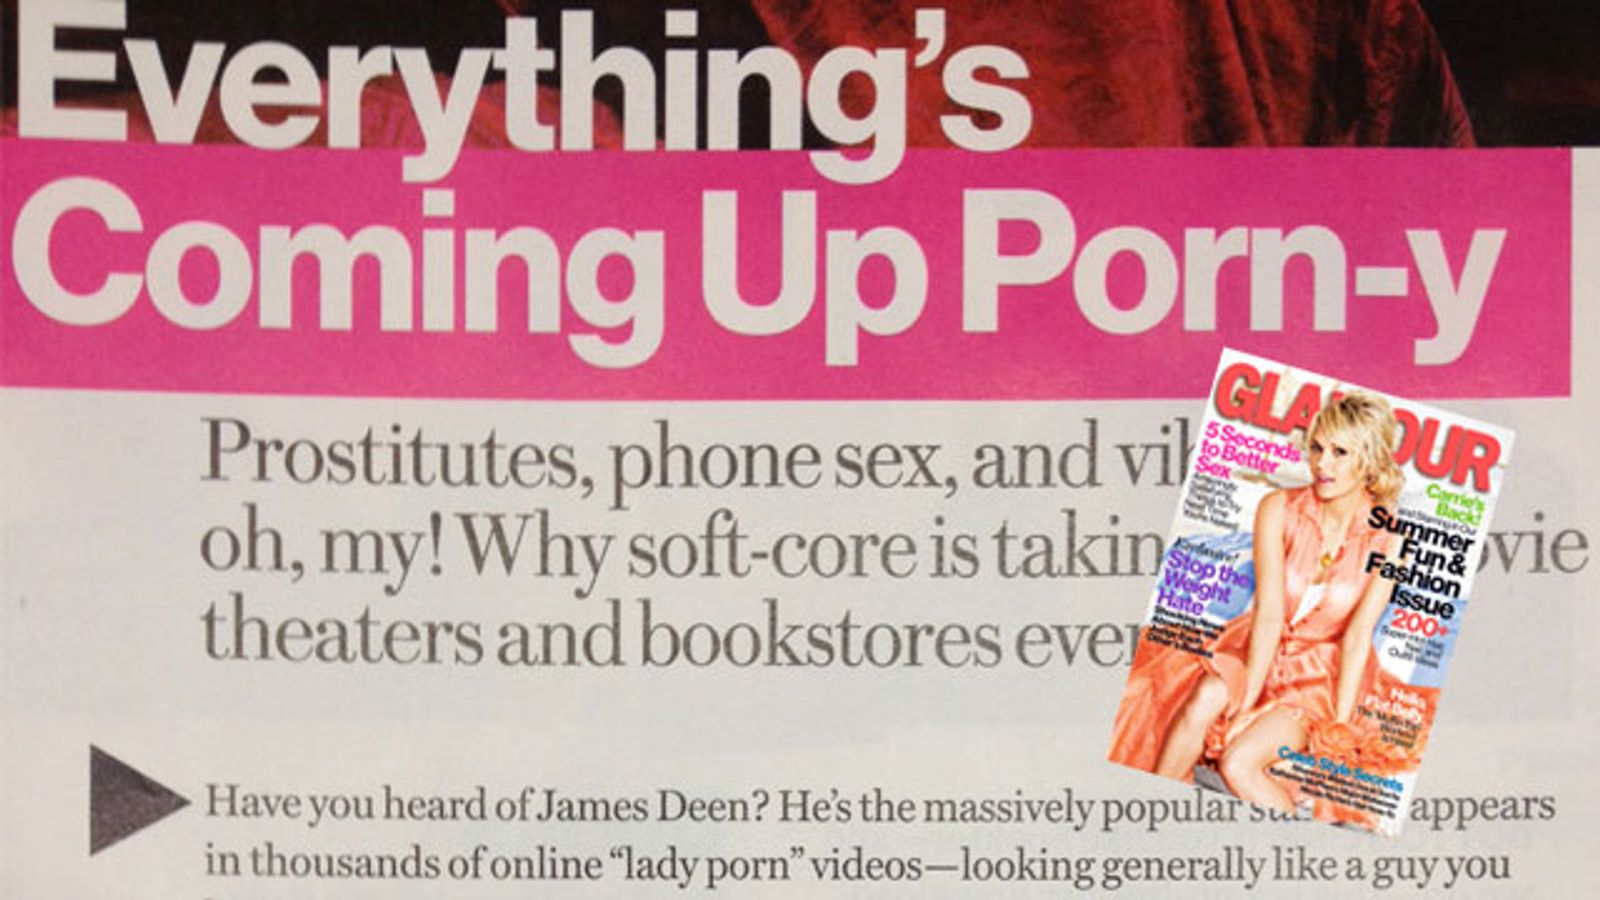 'Glamour' (Sort of) Discovers Porn, Earth Continues to Spin